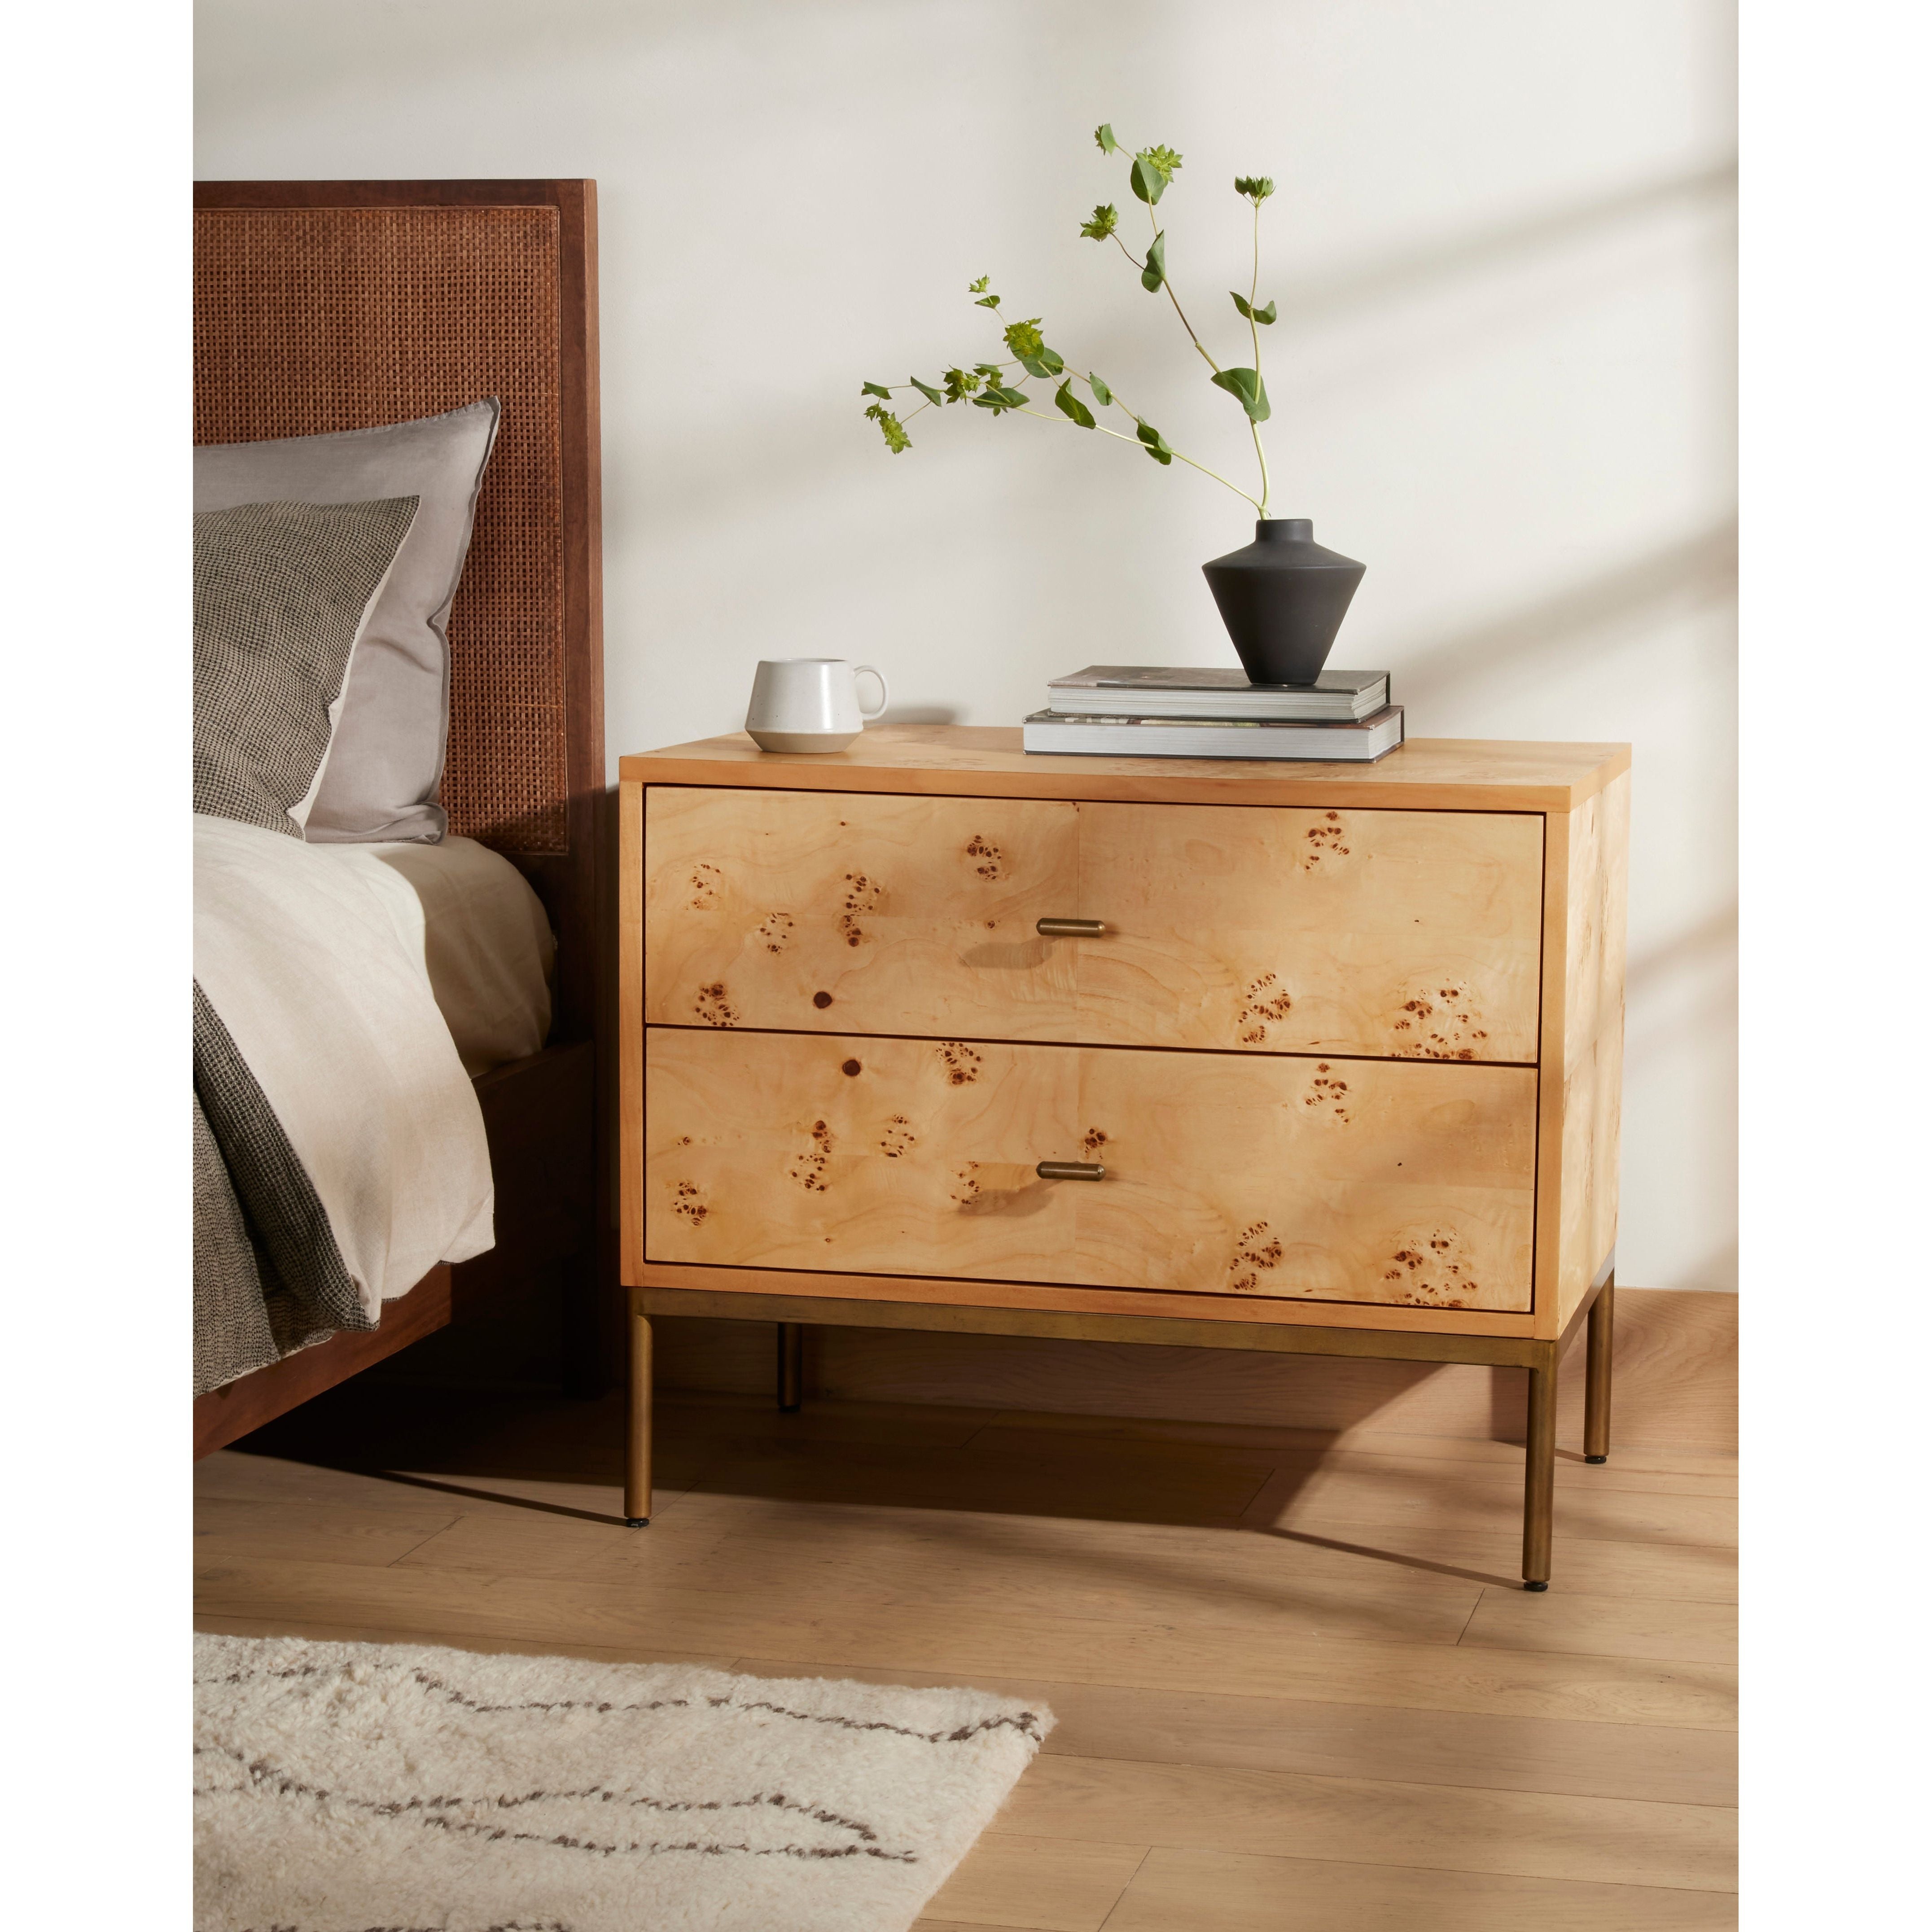 Made from poplar burl veneer with natural knots and graining, a dual-drawer nightstand brings extra storage space to the bedside. Slim brass-finished iron legs and hardware keep things looking light. Amethyst Home provides rugs, furniture, home decor, and lighting in the Omaha metro area!